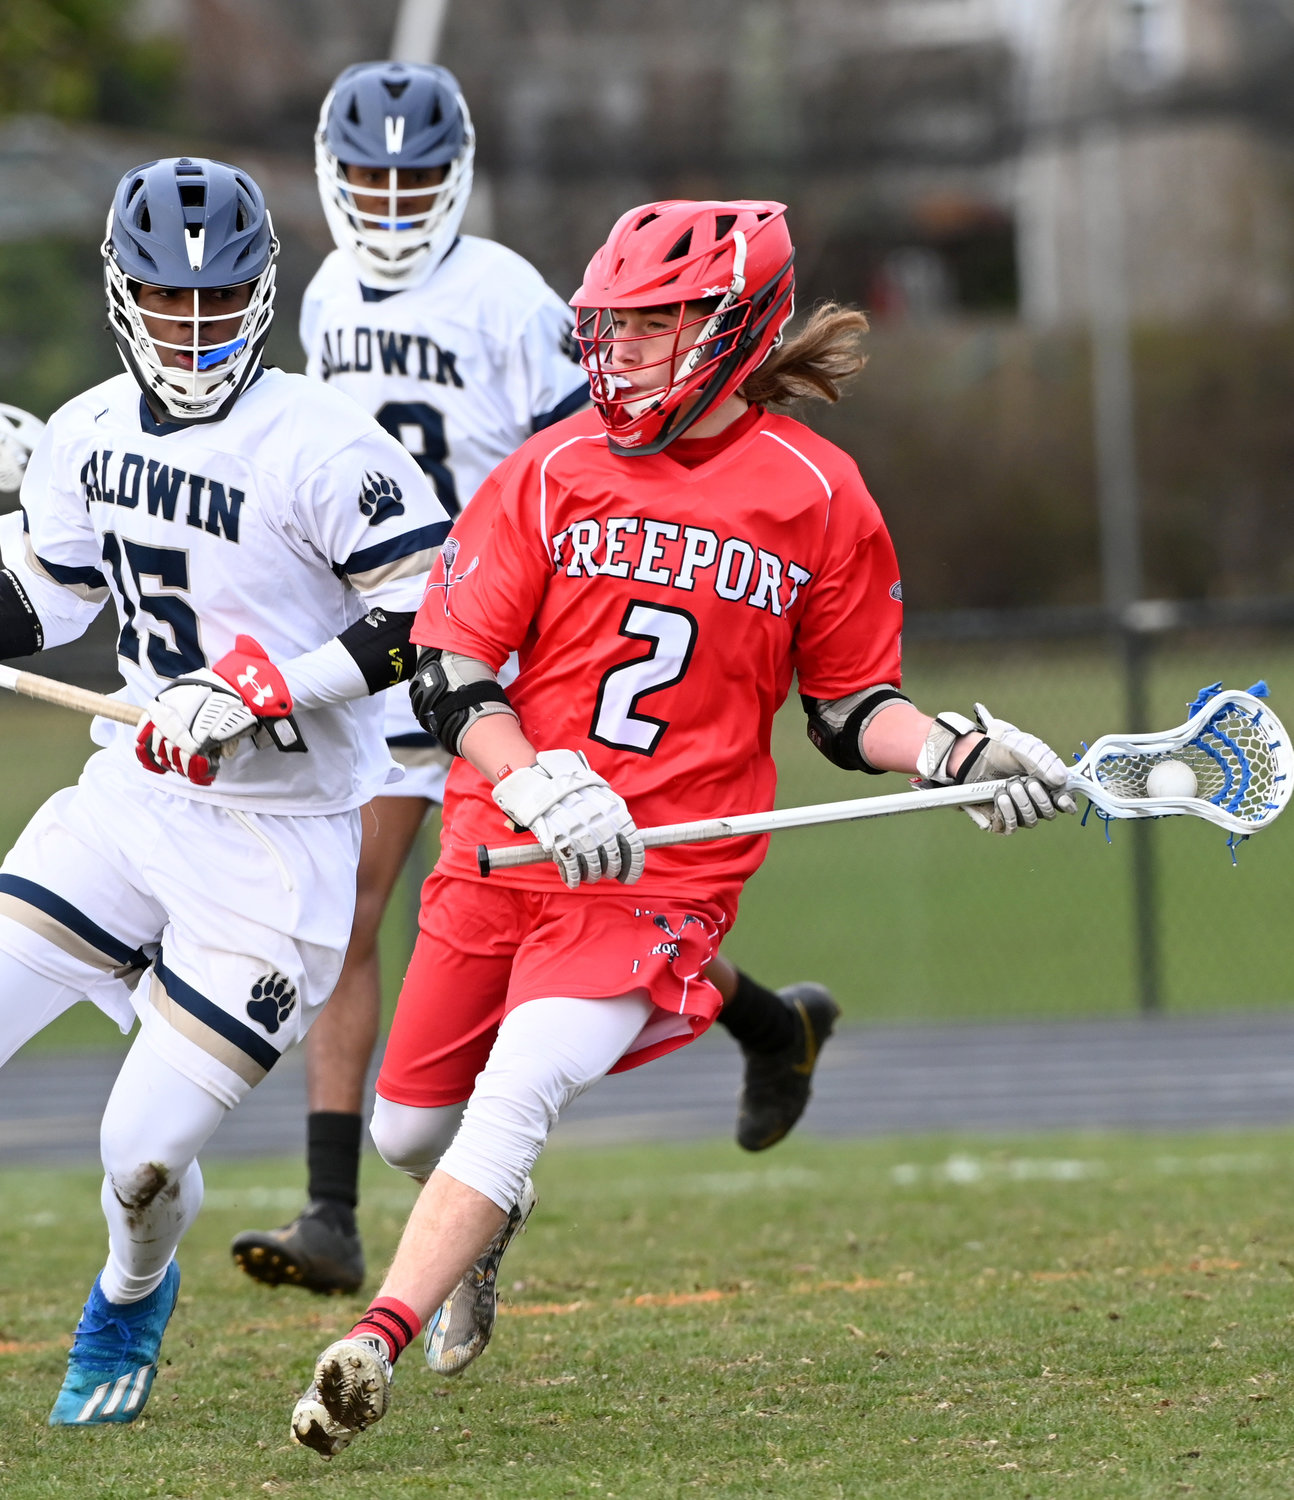 Justin Reinke, right, had a hat trick and two assists to lead the Red Devils to an 8-5 victory at Hempstead on May 3.